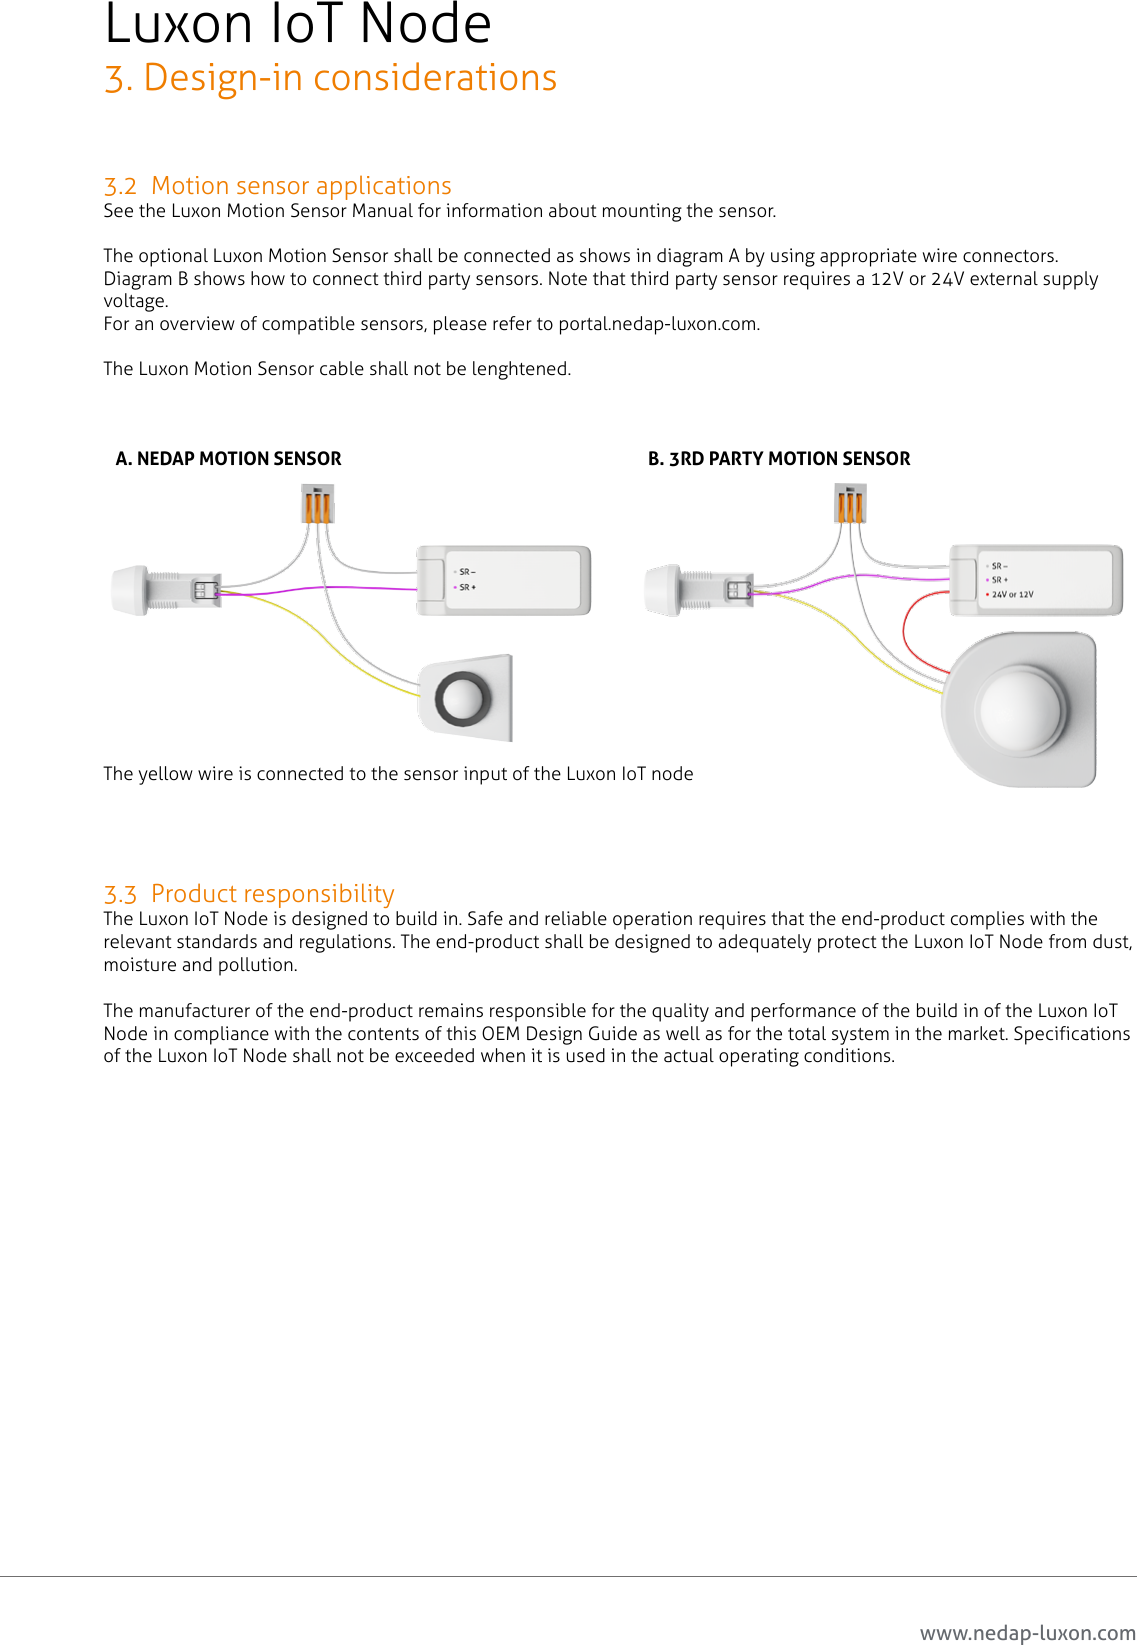 www.nedap-luxon.com3.2  Motion sensor applicationsSee the Luxon Motion Sensor Manual for information about mounting the sensor.The optional Luxon Motion Sensor shall be connected as shows in diagram A by using appropriate wire connectors. Diagram B shows how to connect third party sensors. Note that third party sensor requires a 12V or 24V external supply voltage.For an overview of compatible sensors, please refer to portal.nedap-luxon.com.The Luxon Motion Sensor cable shall not be lenghtened.The yellow wire is connected to the sensor input of the Luxon IoT node3.3  Product responsibilityThe Luxon IoT Node is designed to build in. Safe and reliable operation requires that the end-product complies with the relevant standards and regulations. The end-product shall be designed to adequately protect the Luxon IoT Node from dust, moisture and pollution. The manufacturer of the end-product remains responsible for the quality and performance of the build in of the Luxon IoT Node in compliance with the contents of this OEM Design Guide as well as for the total system in the market. Specifications of the Luxon IoT Node shall not be exceeded when it is used in the actual operating conditions.Luxon IoT Node3. Design-in considerationsA. NEDAP MOTION SENSOR B. 3RD PARTY MOTION SENSOR11